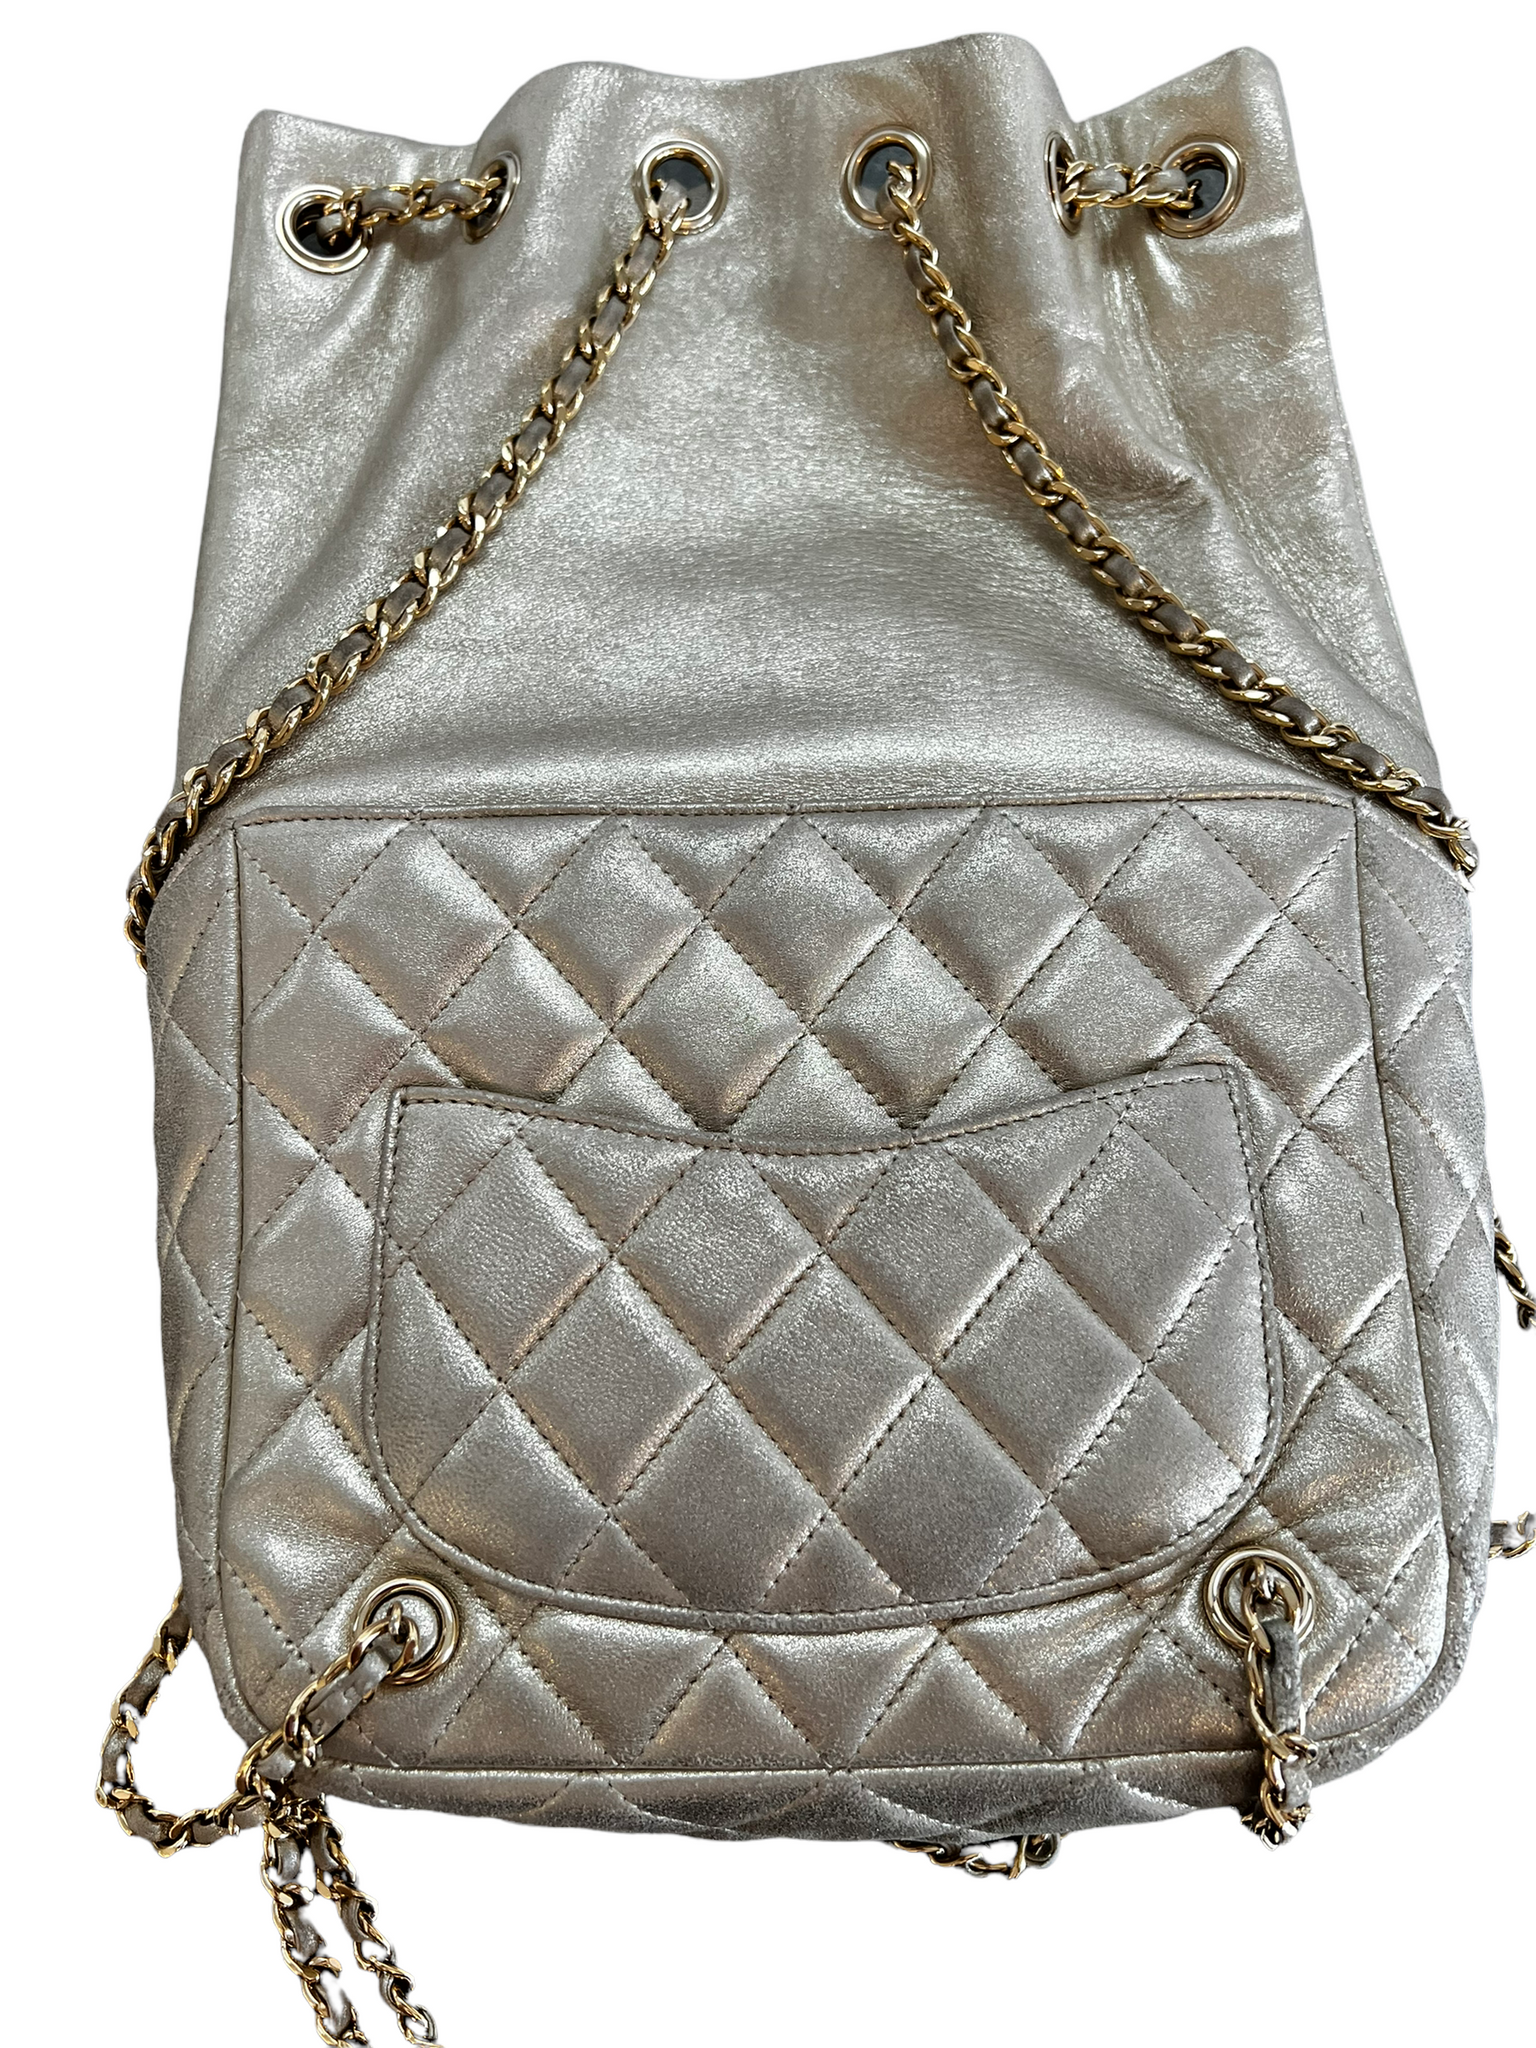 CHANEL Shiny Calfskin Quilted Small Chanel 22 Black 1303069